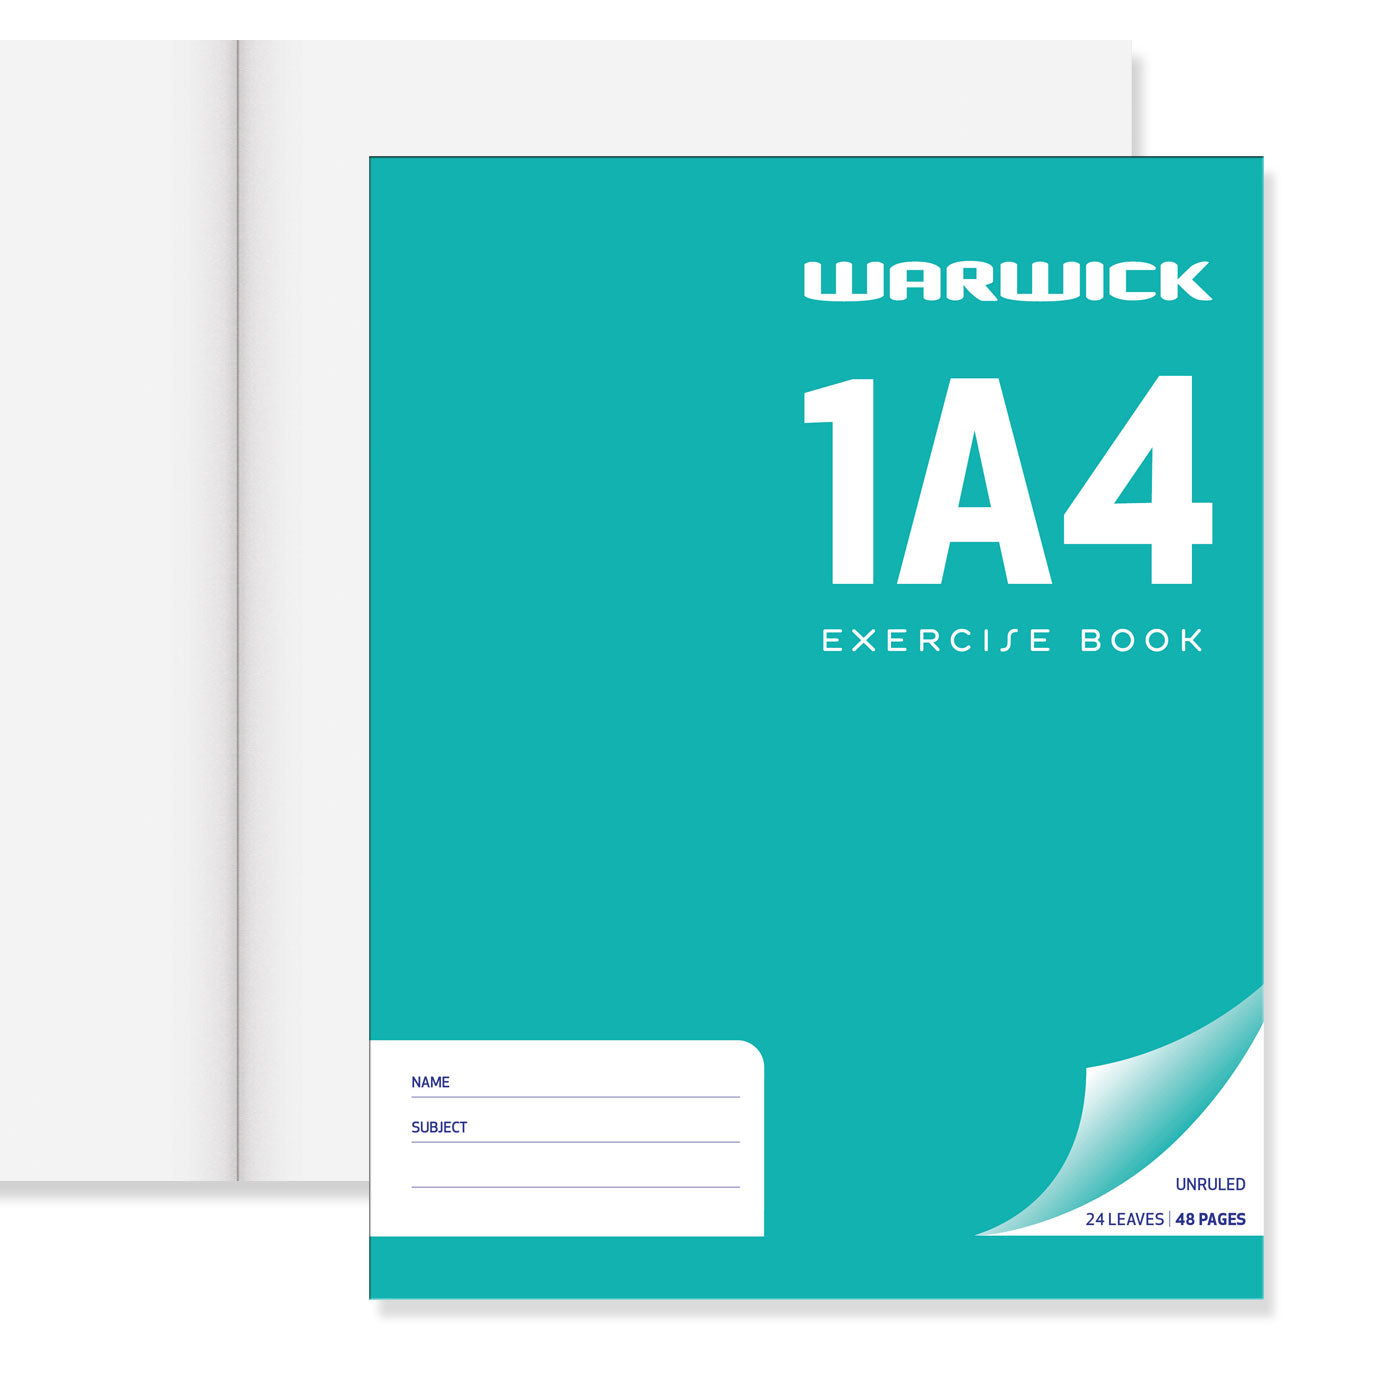 WARWICK EXERCISE BOOK 1A4 24 LEAF UNRULED 230X180MM